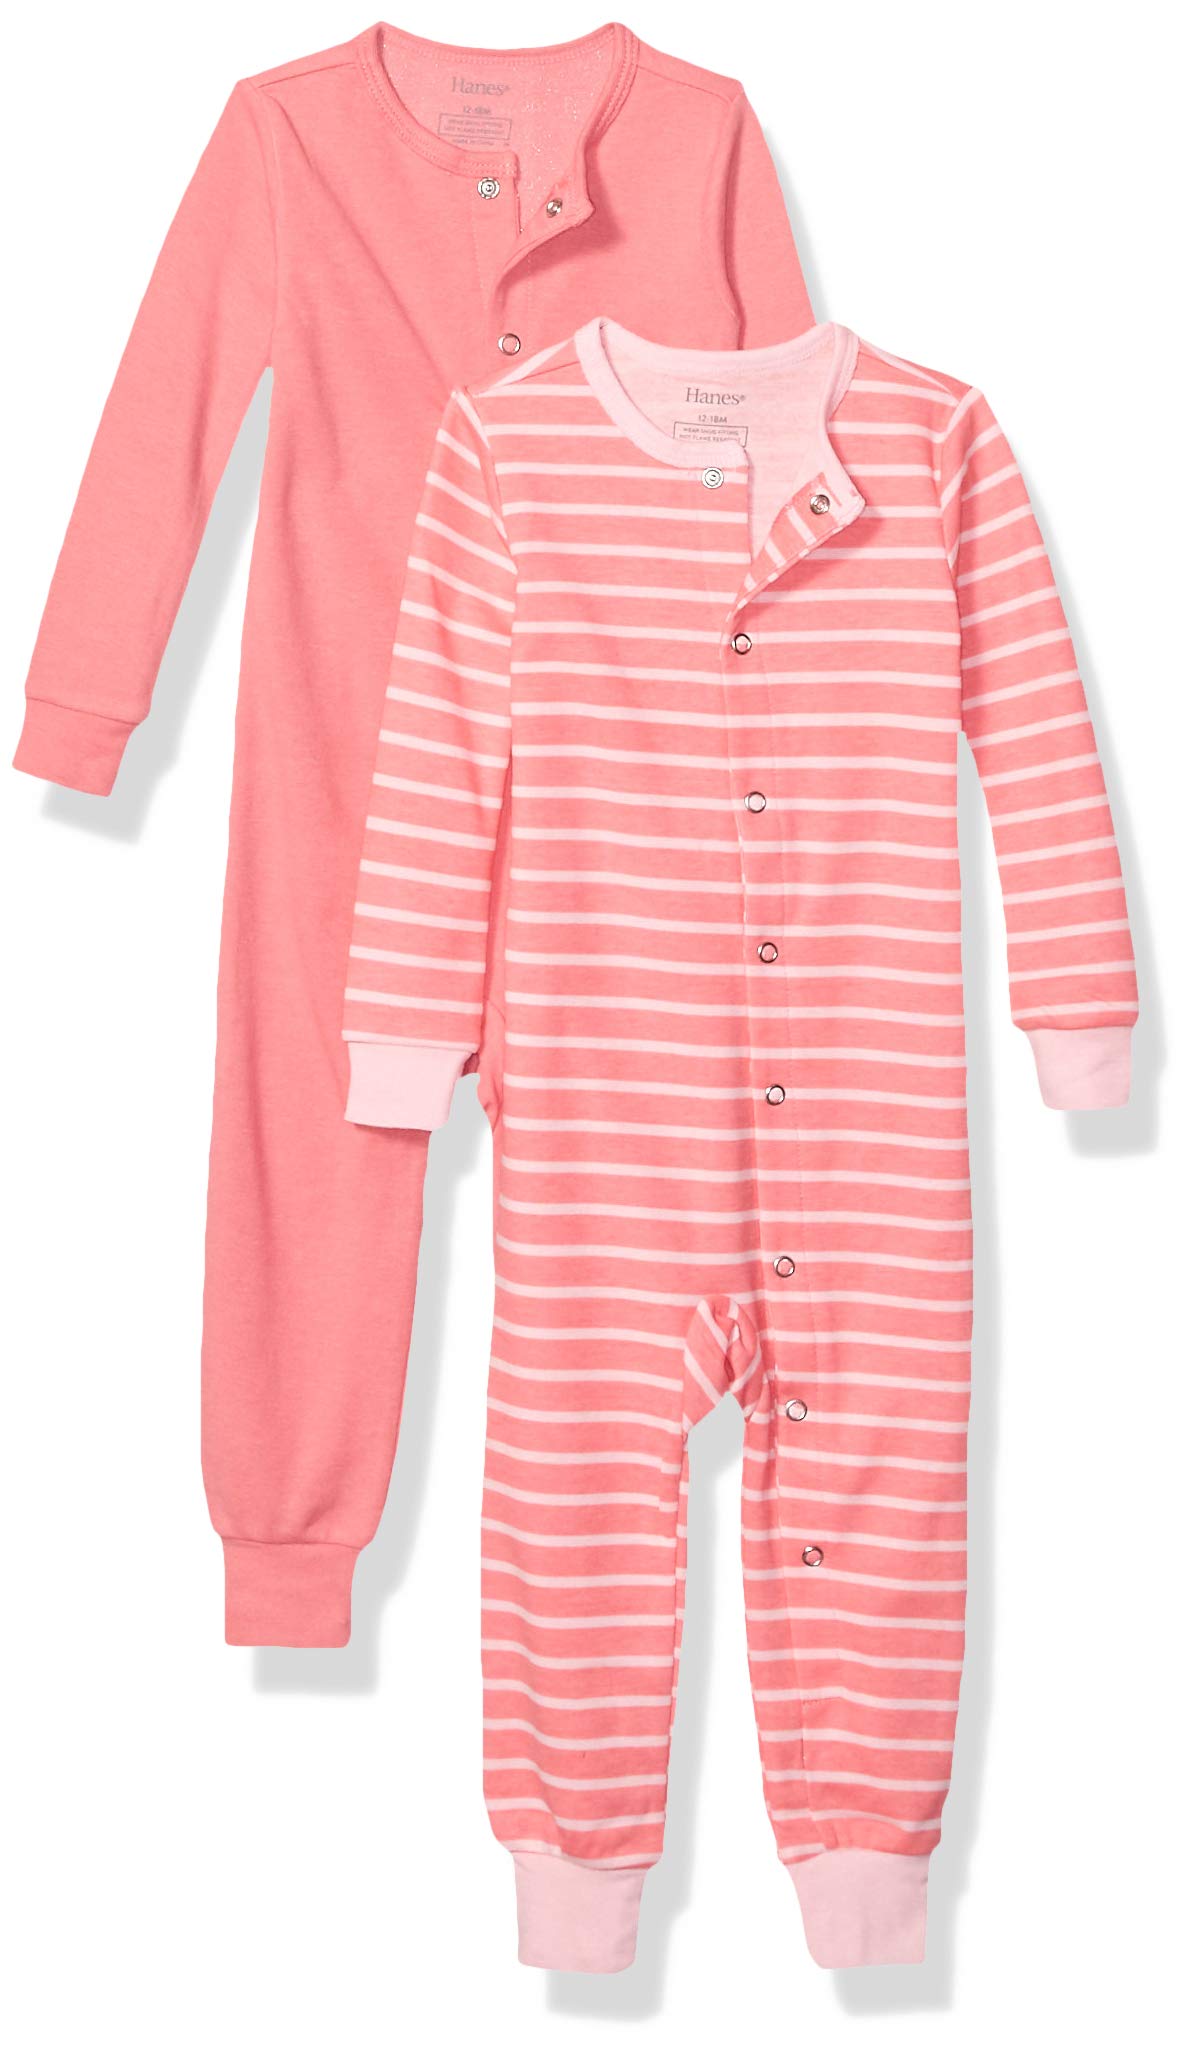 Hanes Boys' Ultimate Baby Flexy 2 Pack Sleep and Play Suits